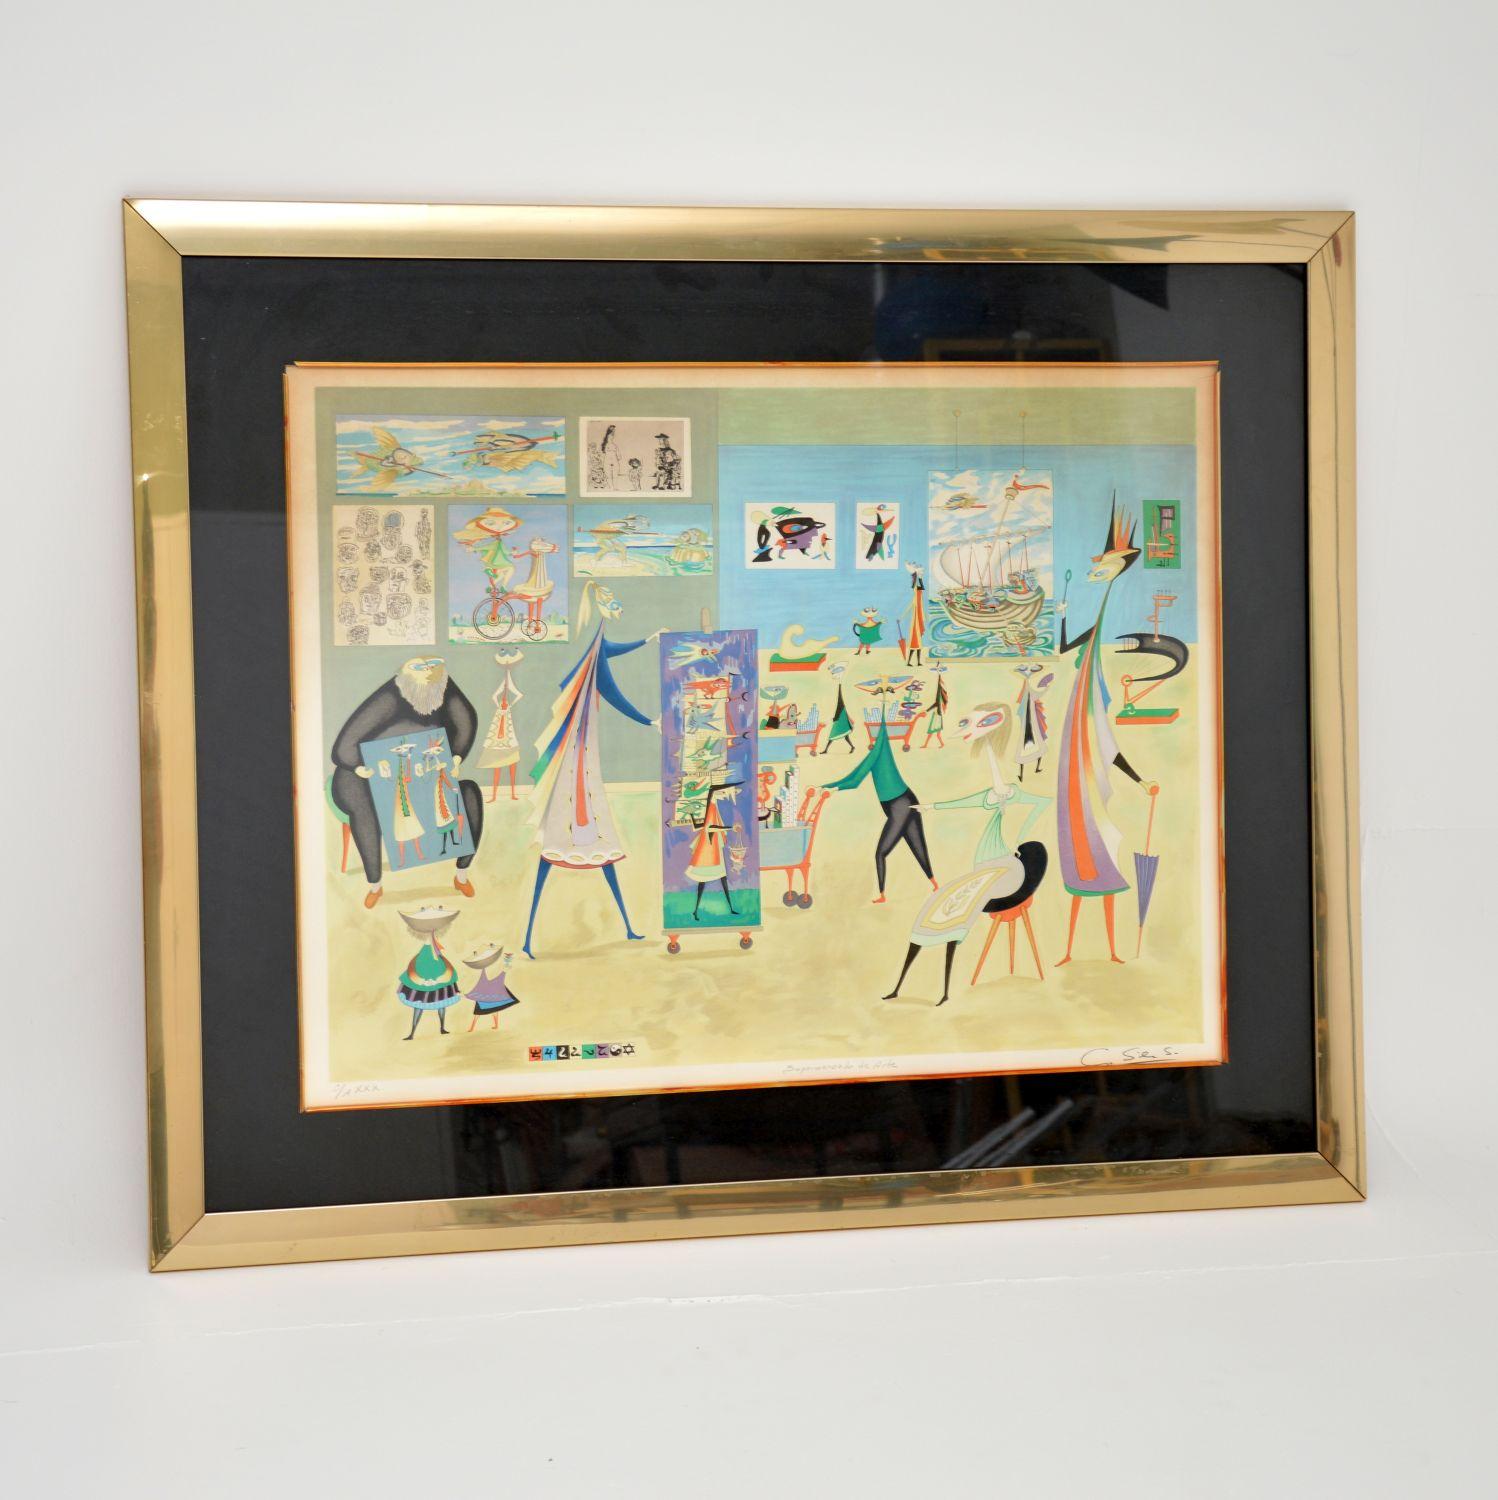 A fabulous artist signed lithograph print by the famous Colombian artist Guillermo Silva. This dates from circa 1965.

This framed print is a great size, and has a lively and playful subject. It is absolutely beautiful in my opinion! Signed and